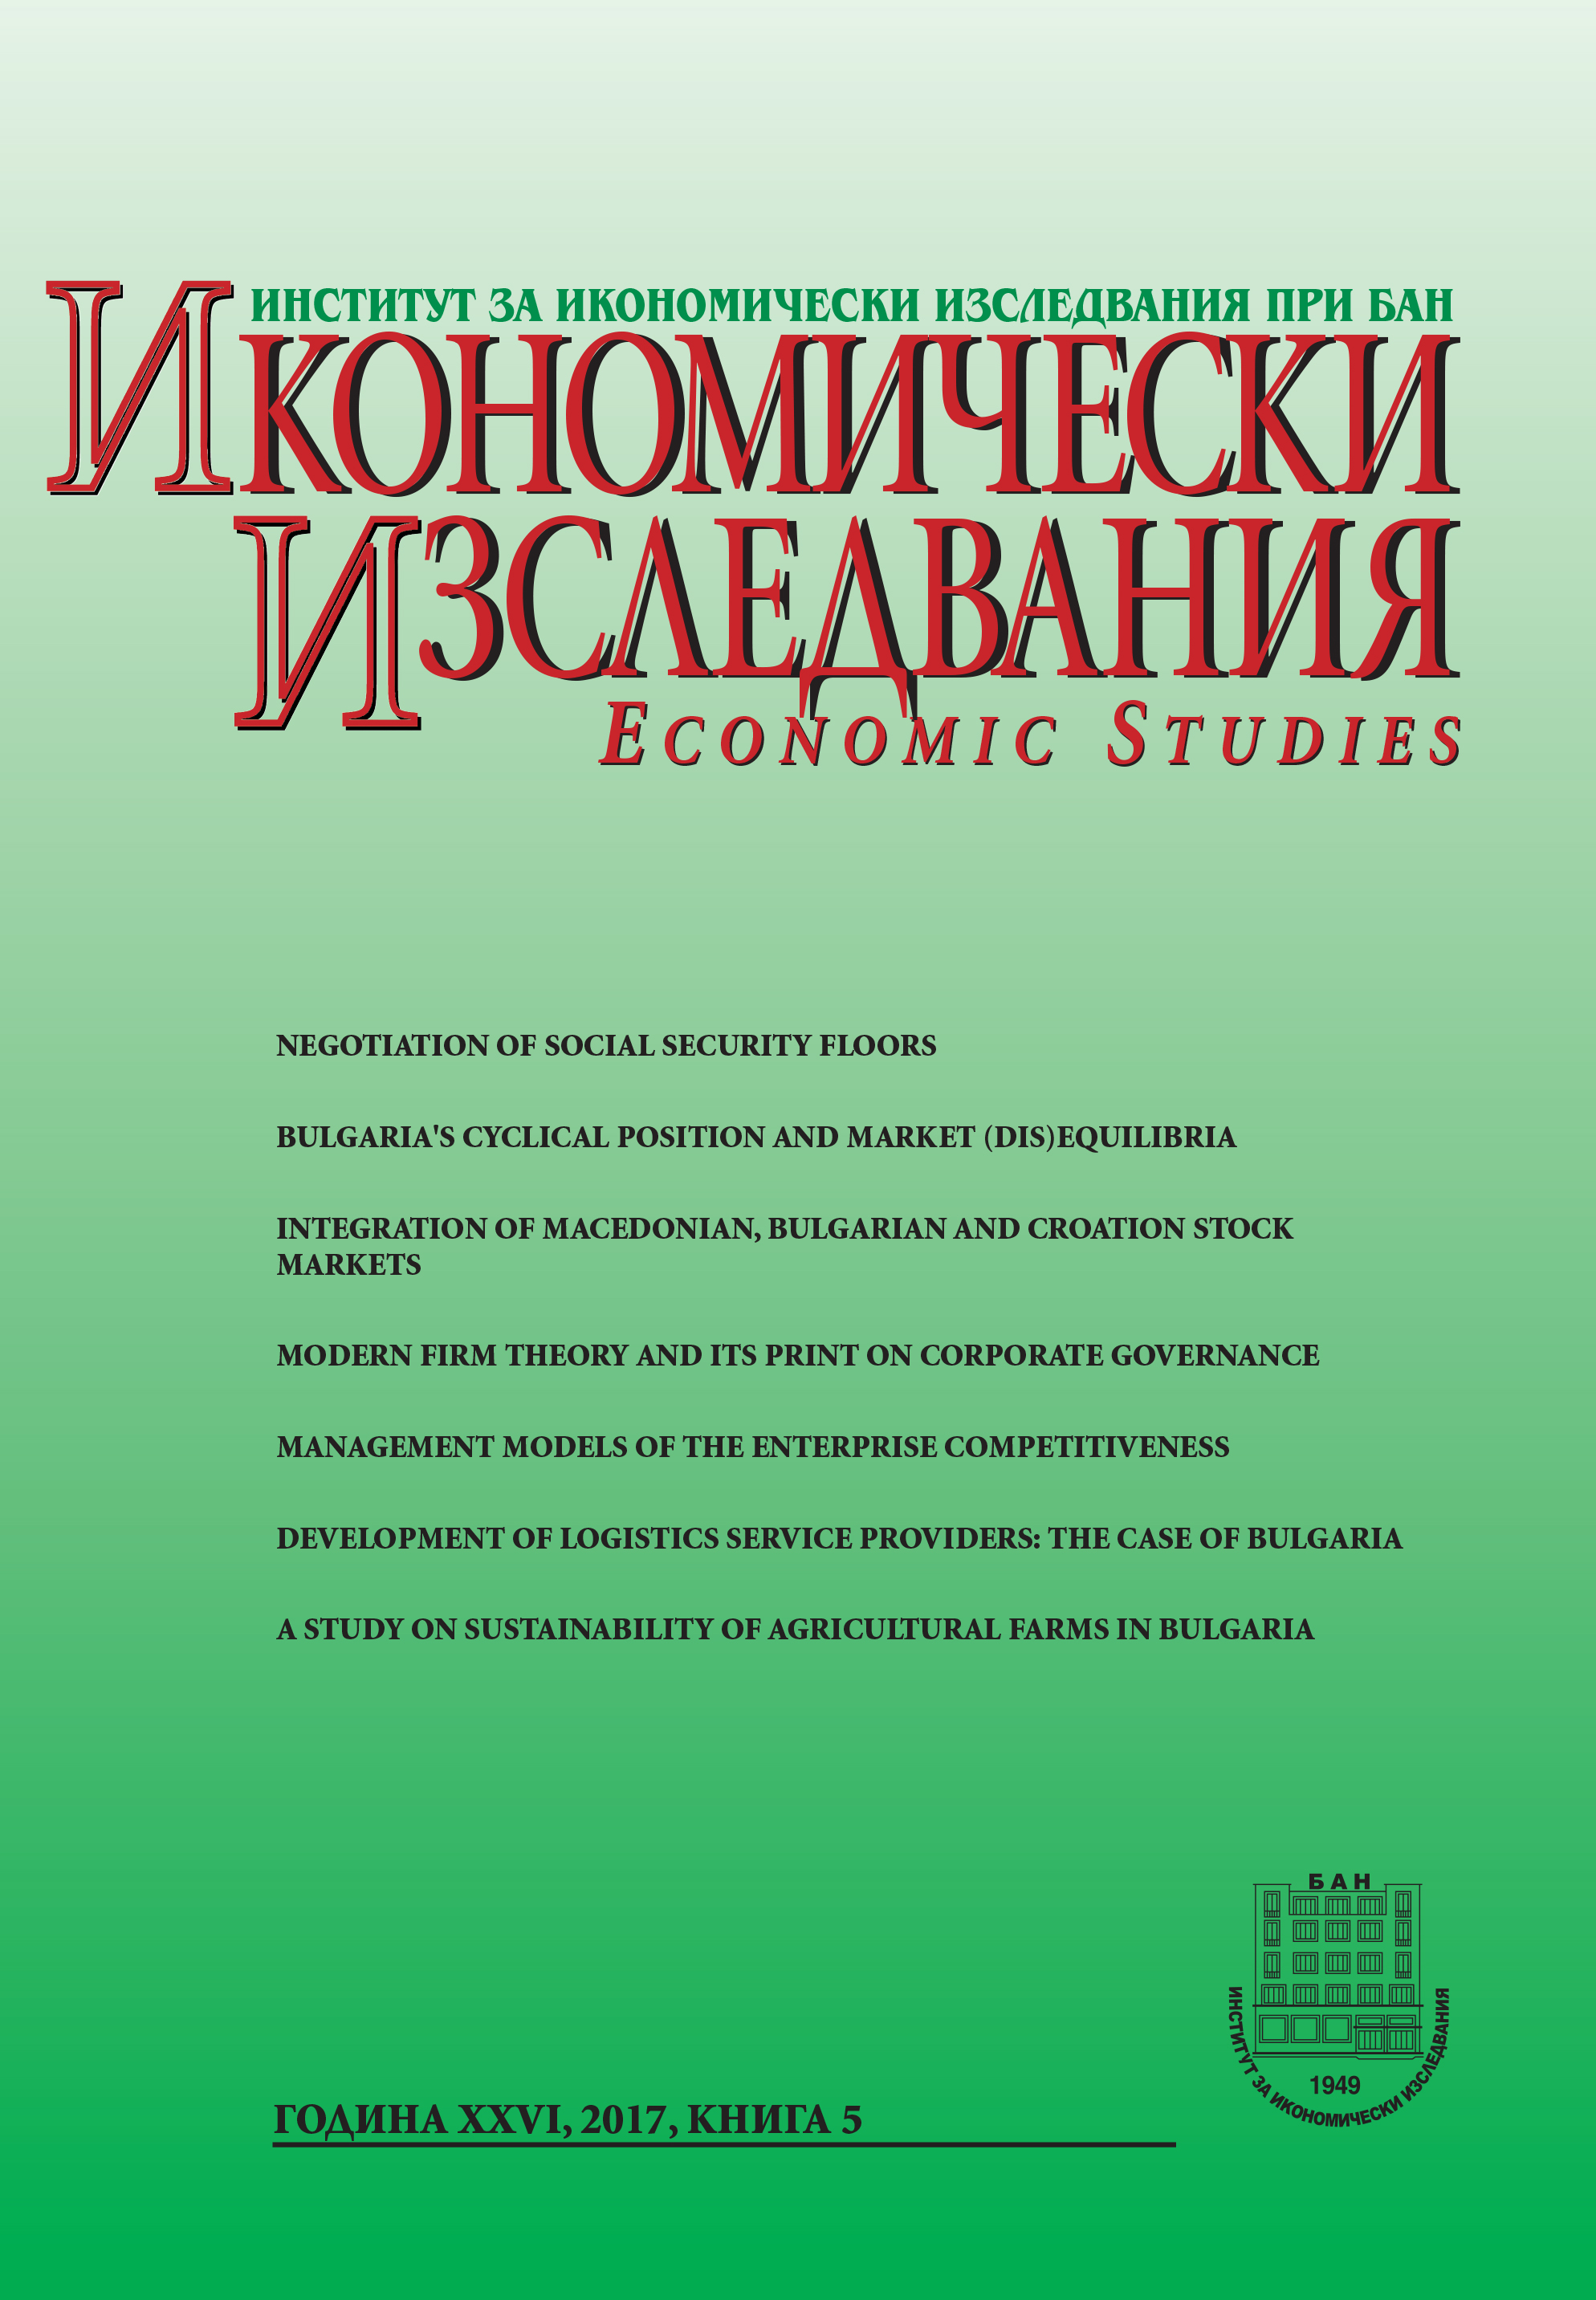 A Study on Sustainability of Agricultural Farms in Bulgaria